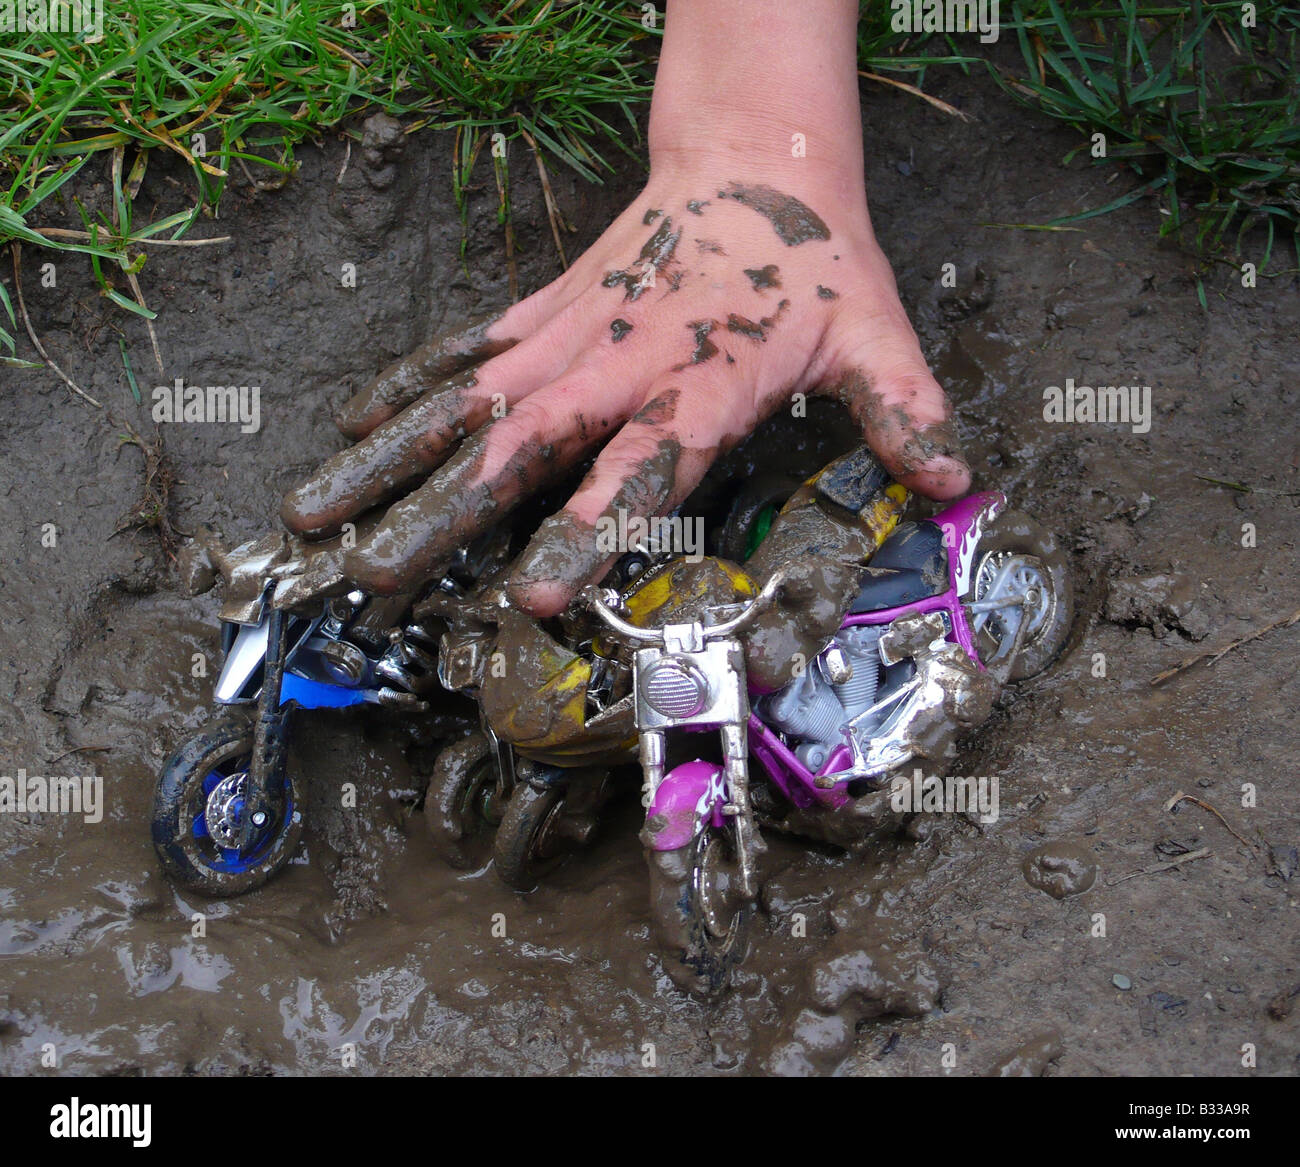 child playing with motor bike toys in mud Stock Photo